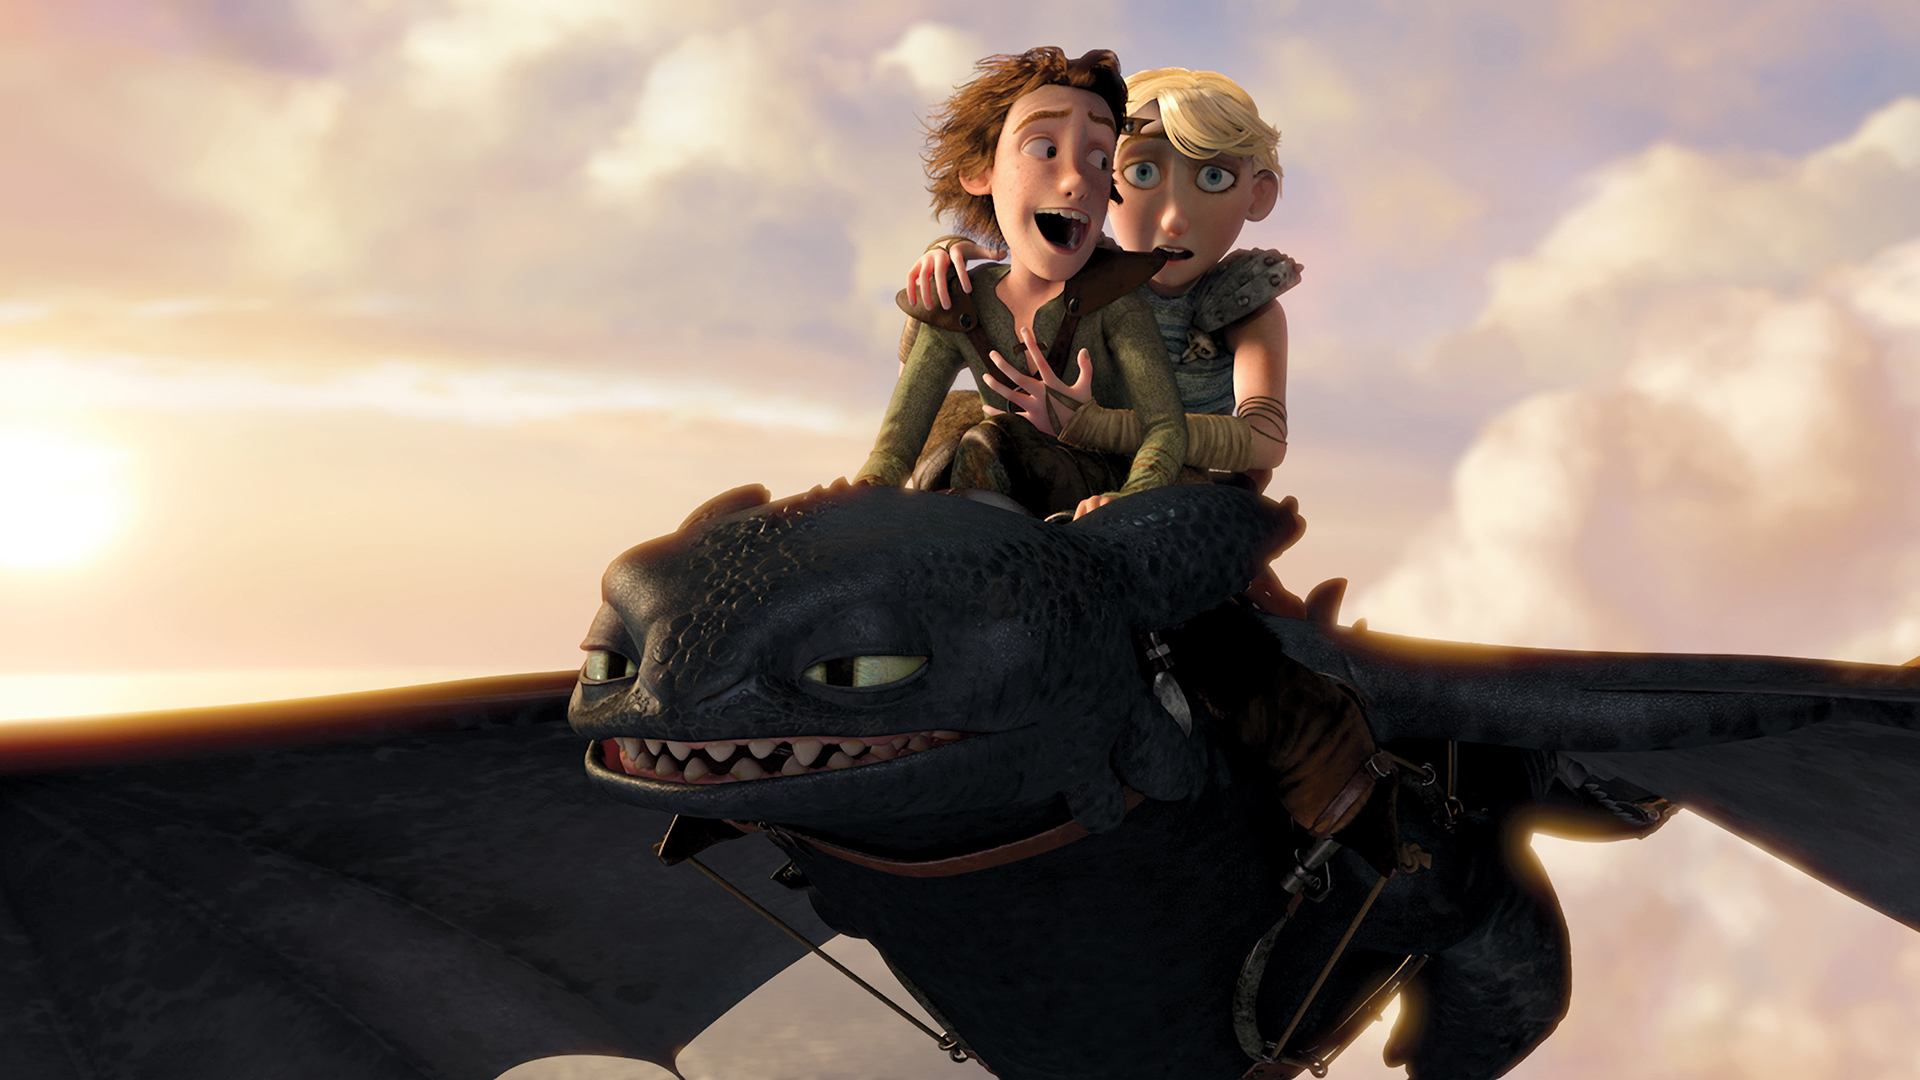 Train Your Dragon Toothless - HD Wallpaper 